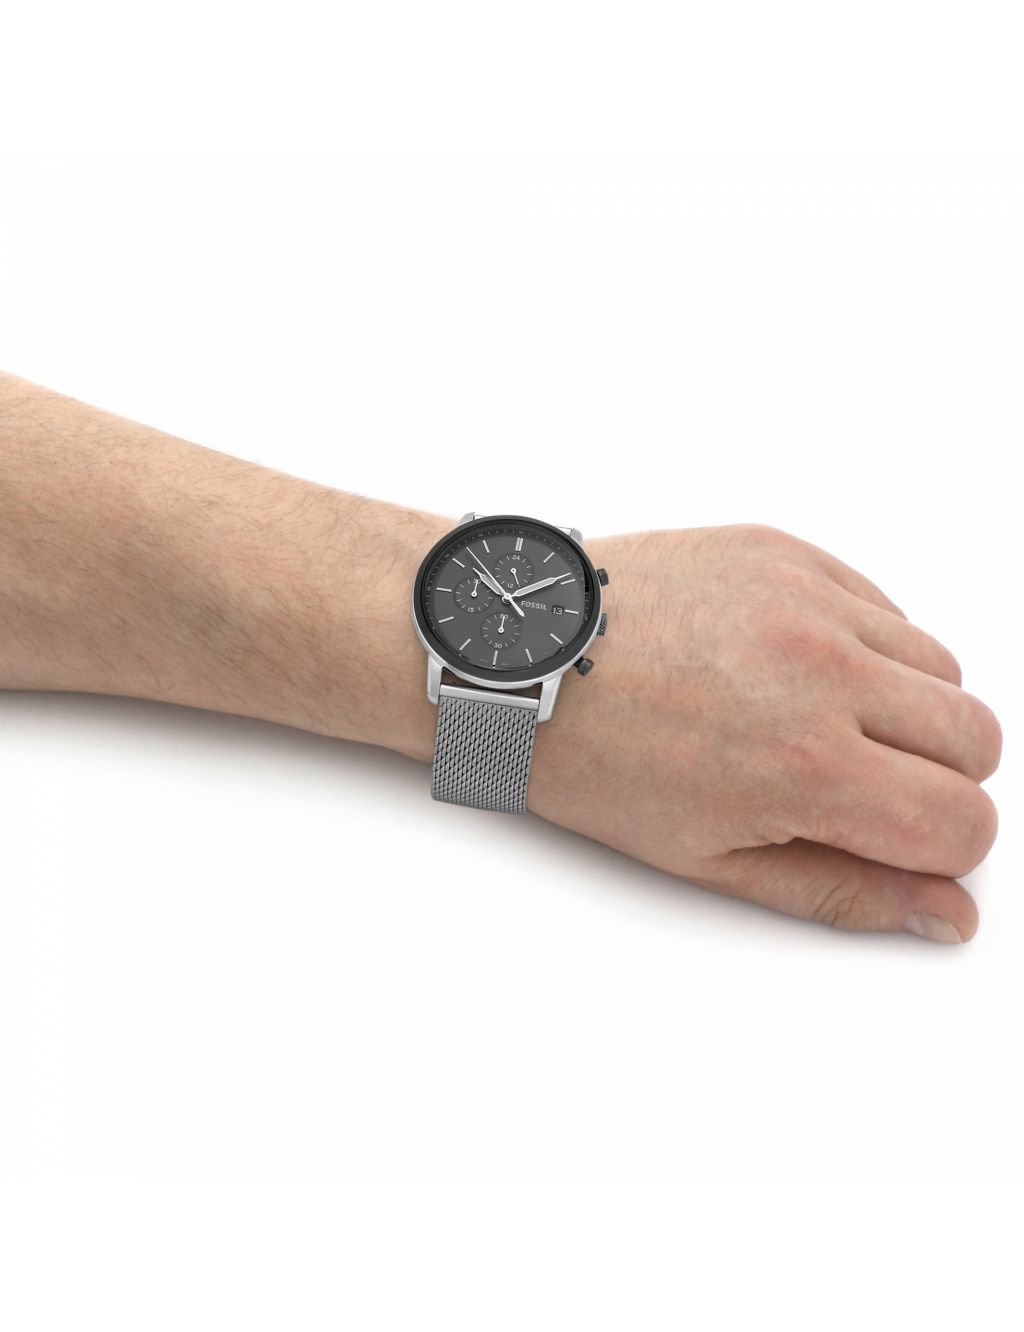 Fossil Minimalist Stainless Steel Watch image 4